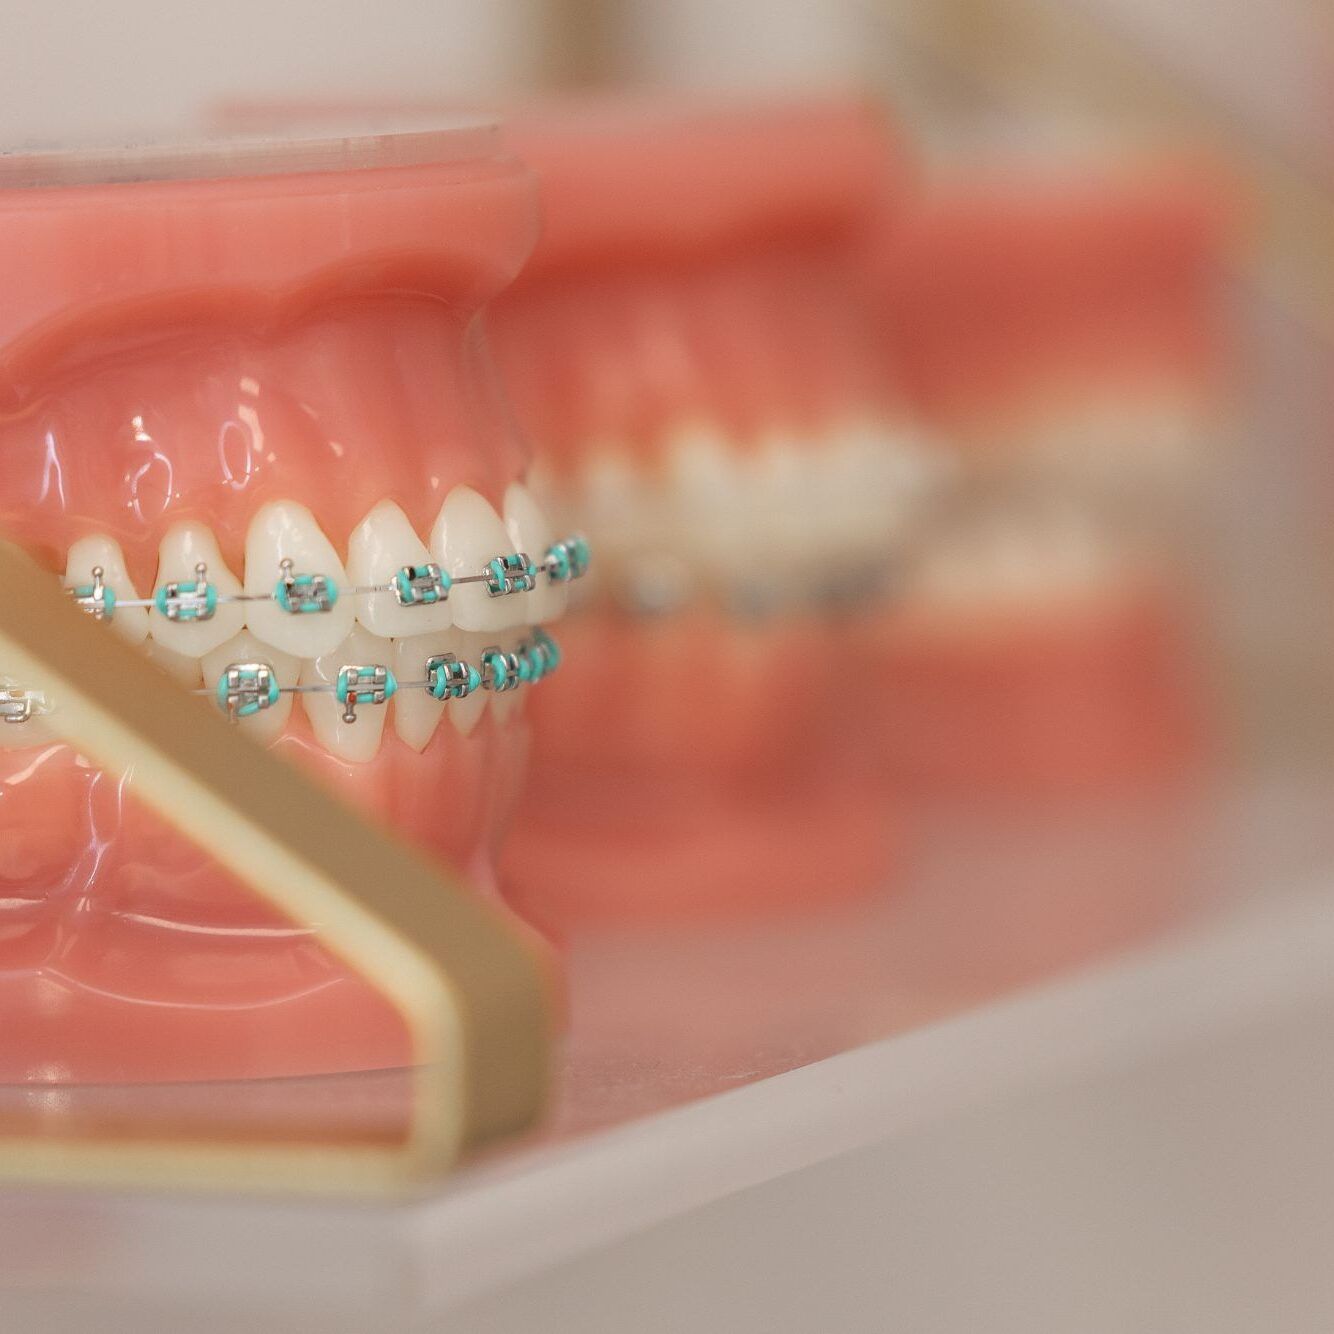 a close up of a model of teeth with blue braces